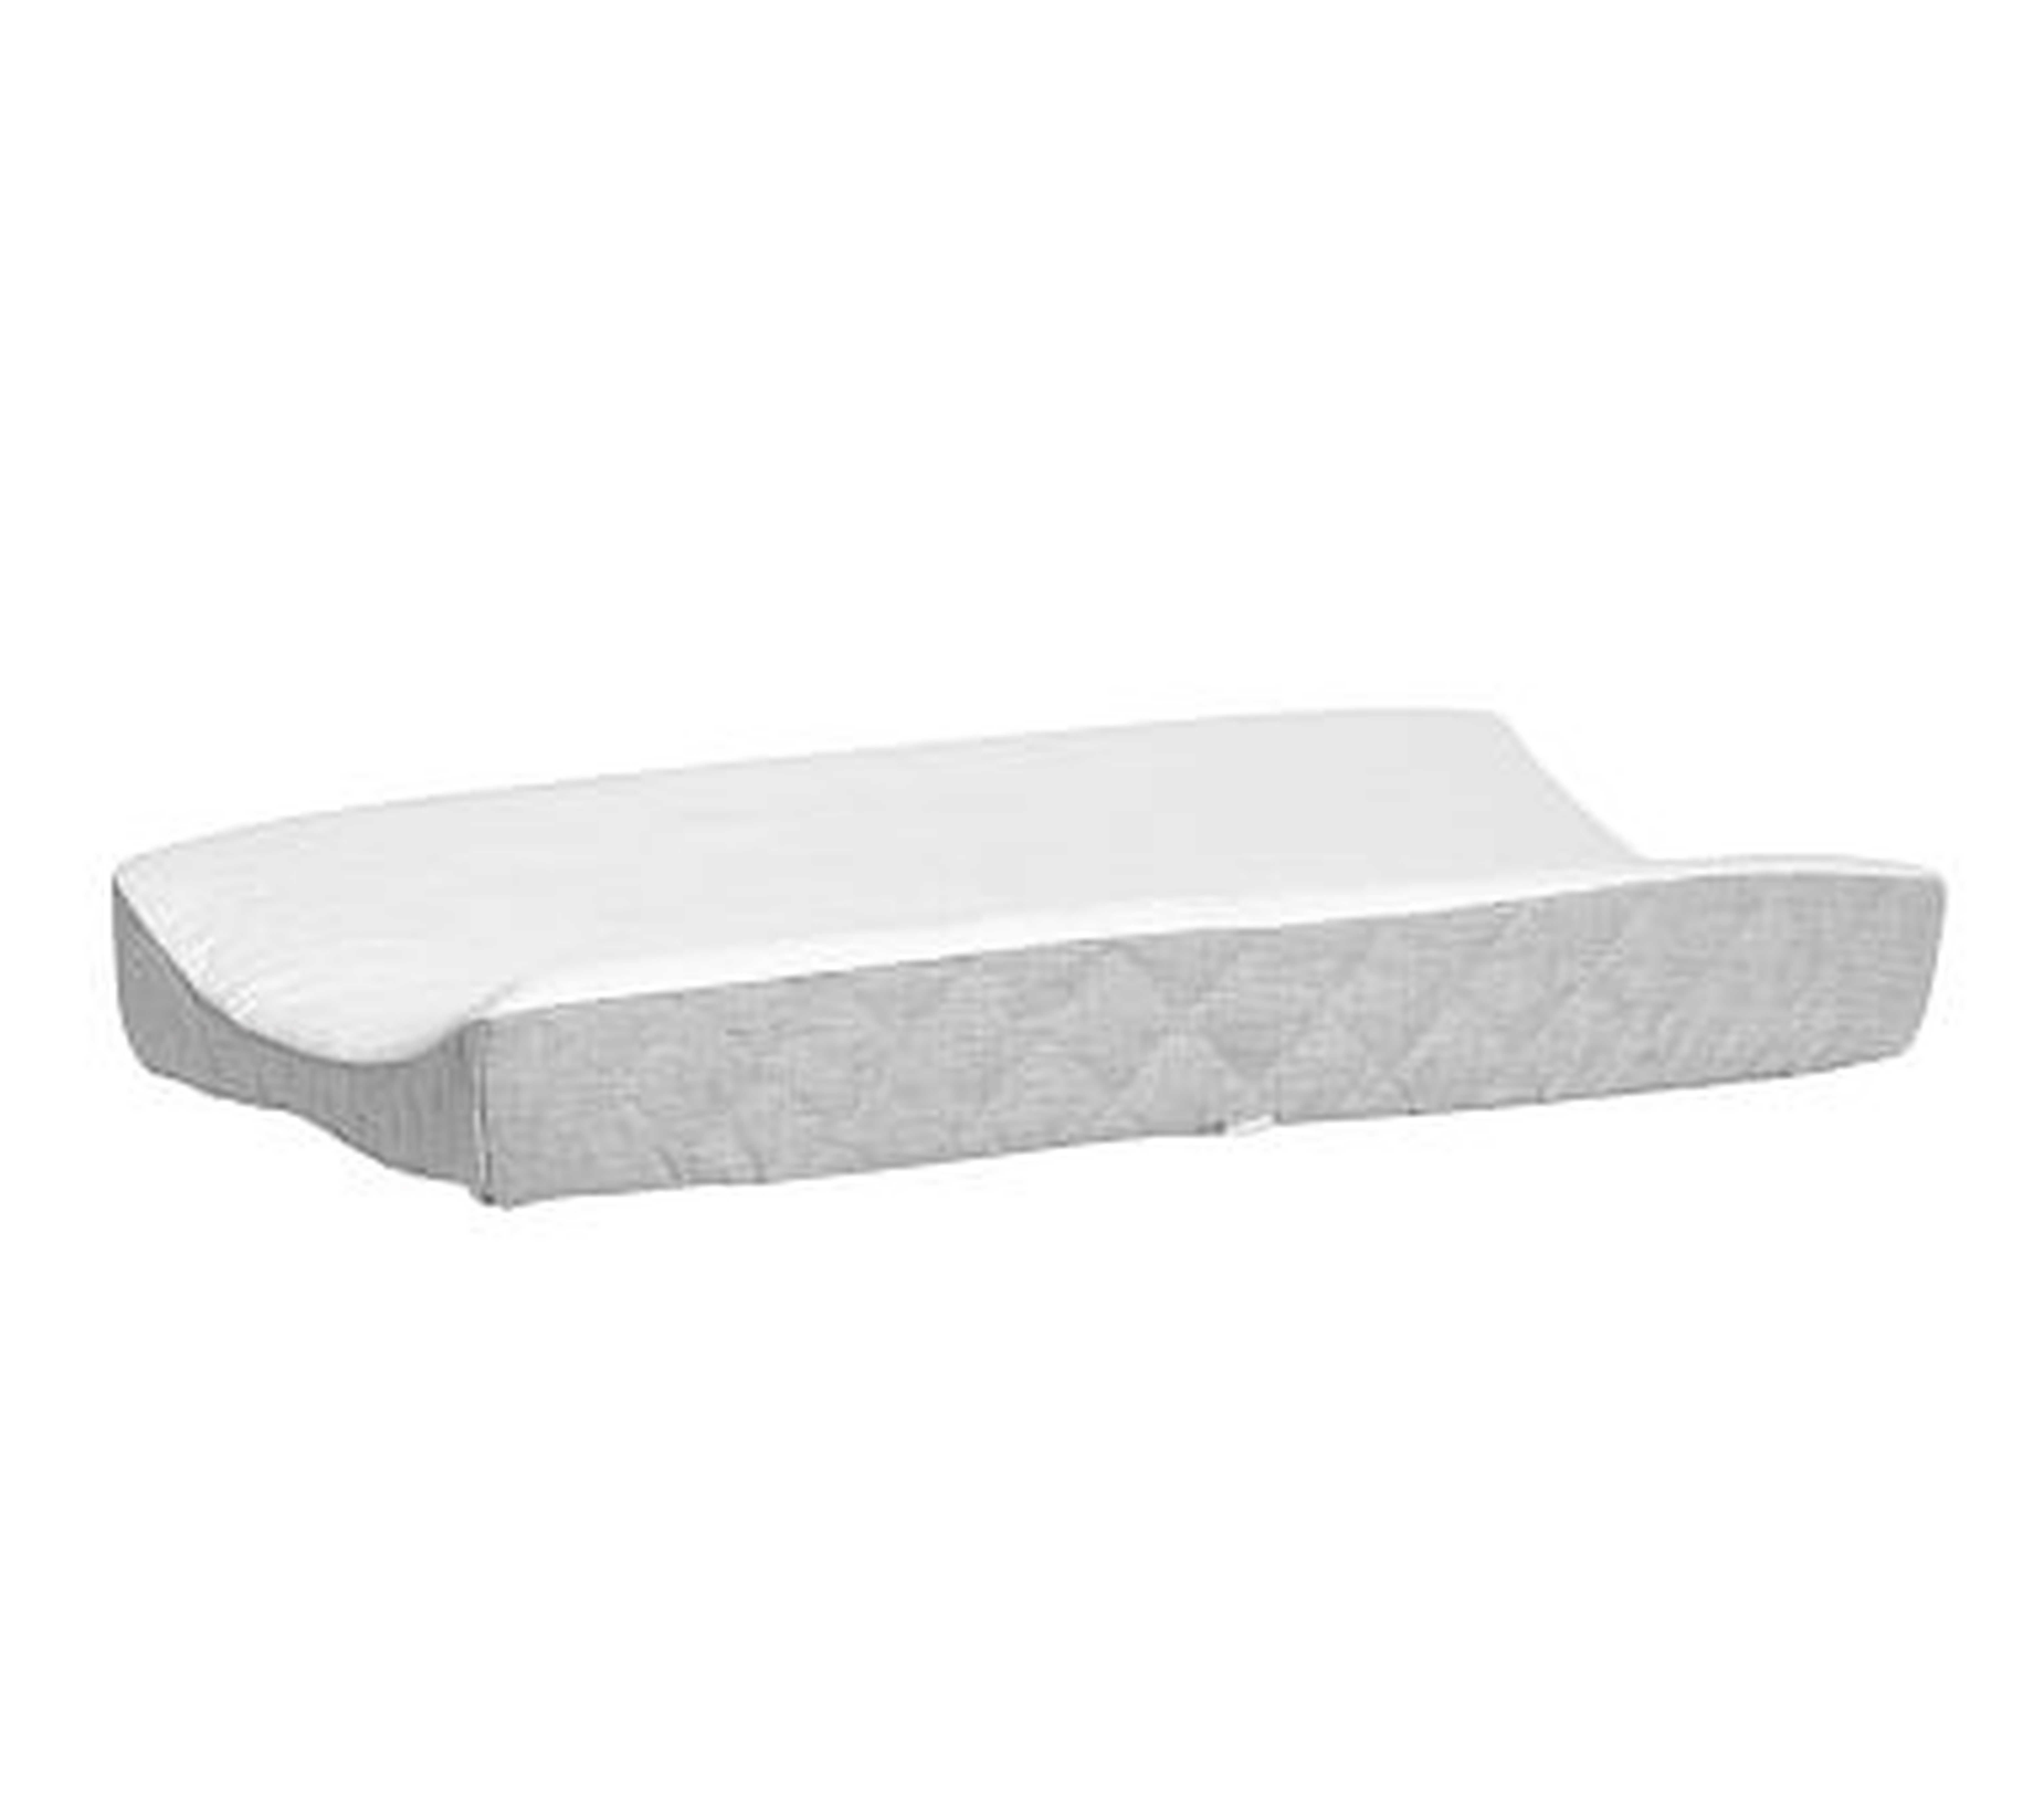 Belgian Flax Linen Changing Pad Cover, Gray - Pottery Barn Kids